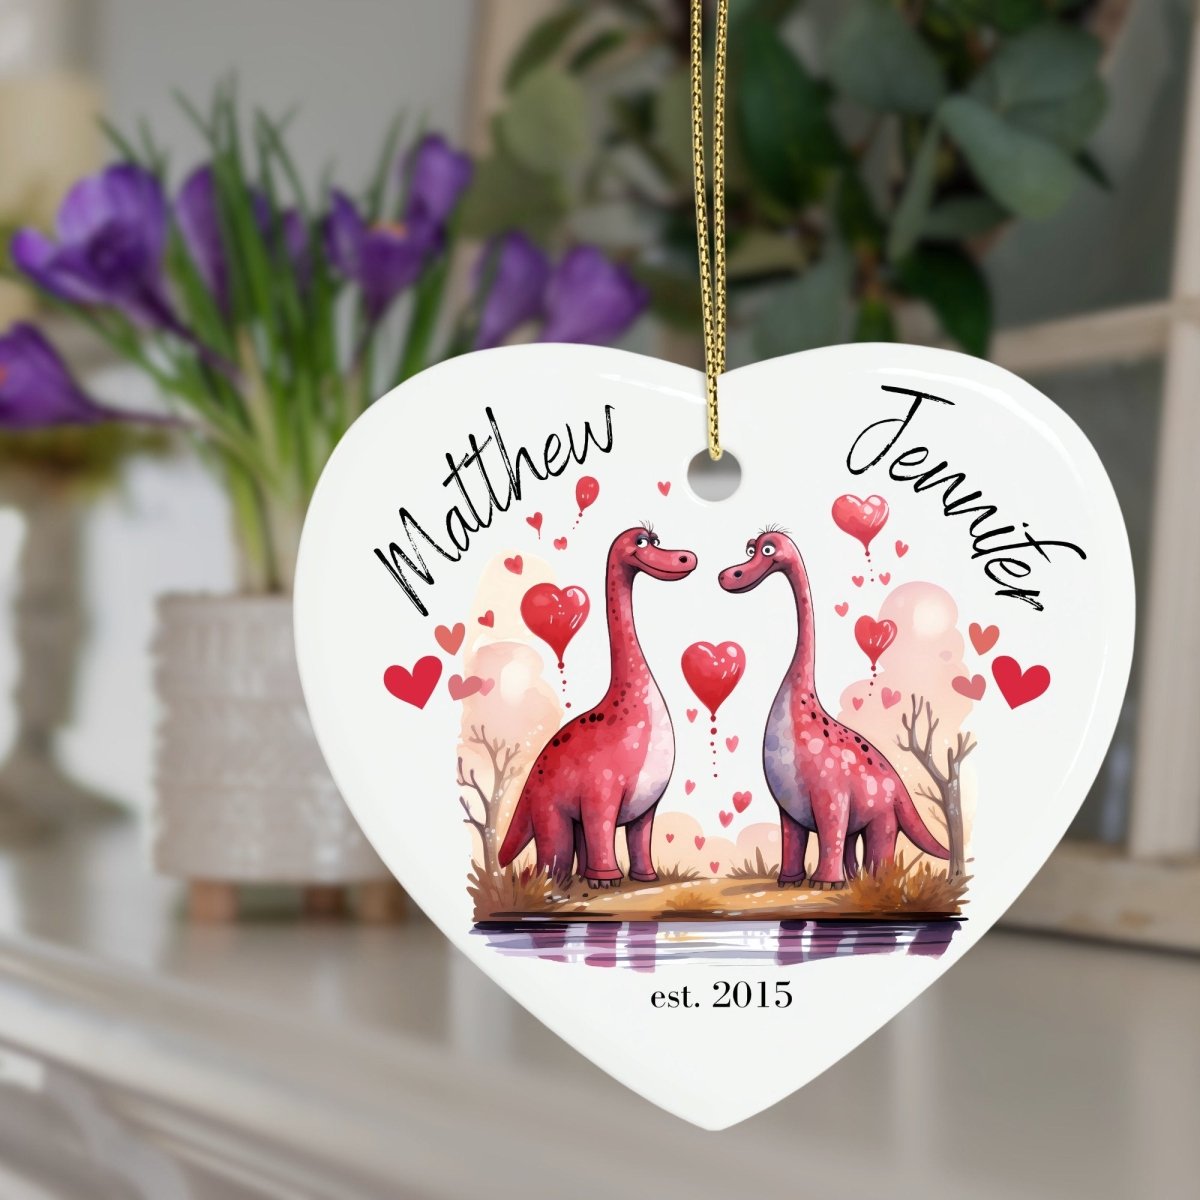 Cute personalised Dinosaur Couple Ornament Ceramic Heart Ornament Lovers Keepsake Valentines Day Gift Anniversary Gift Idea for Soulmates - Everything Pixel